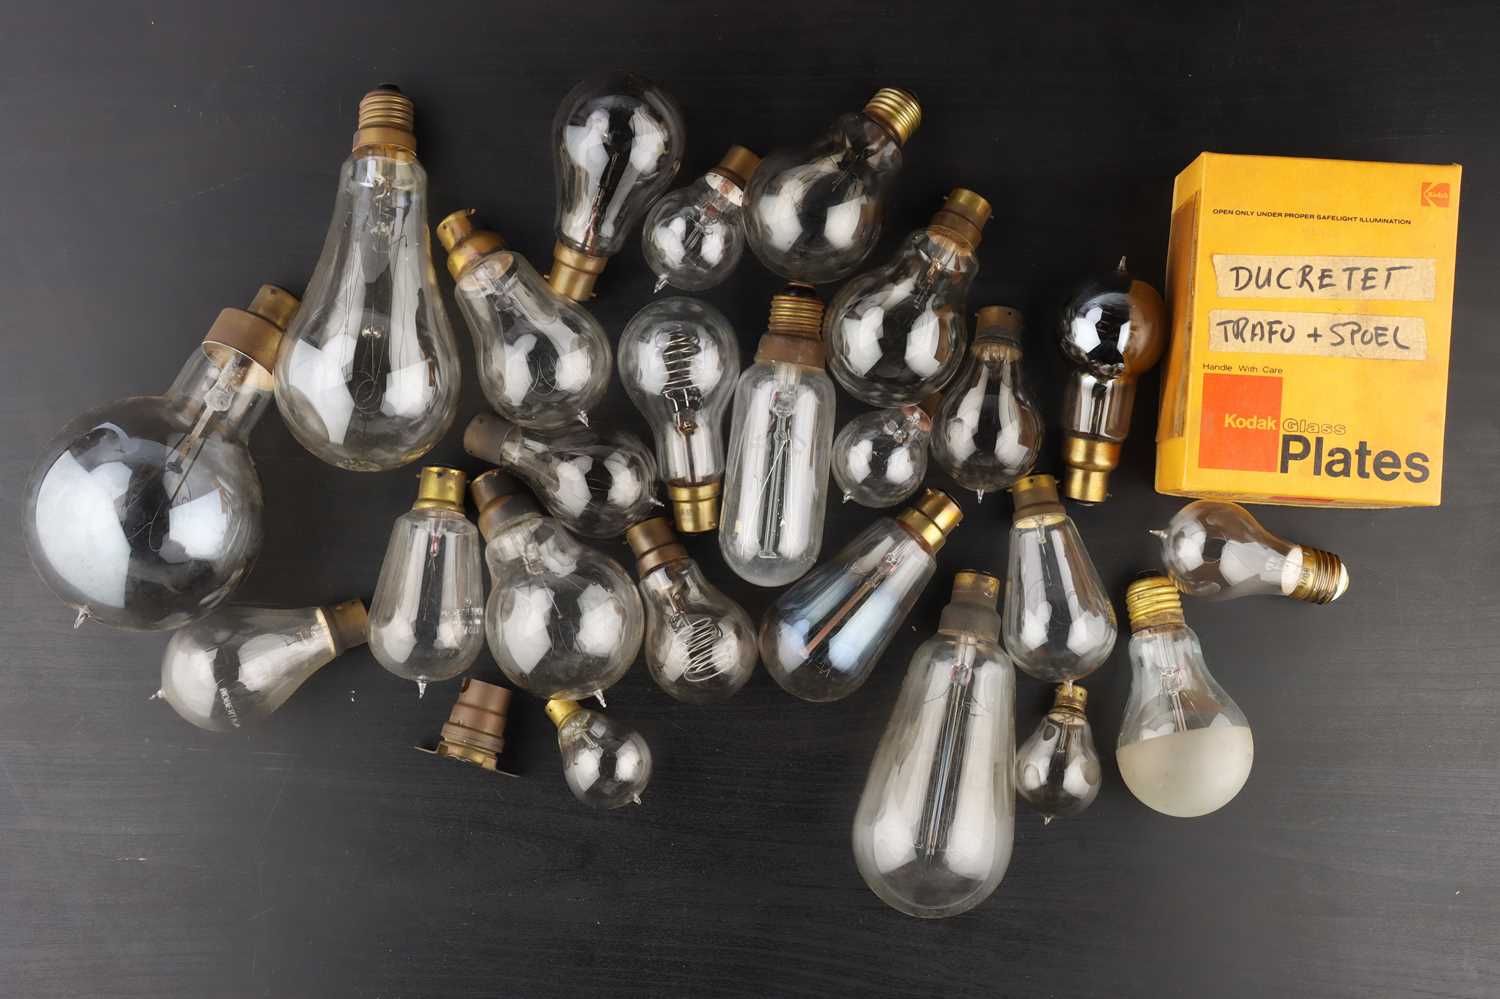 Lot 16 - Large Collection of Early Light Bulbs